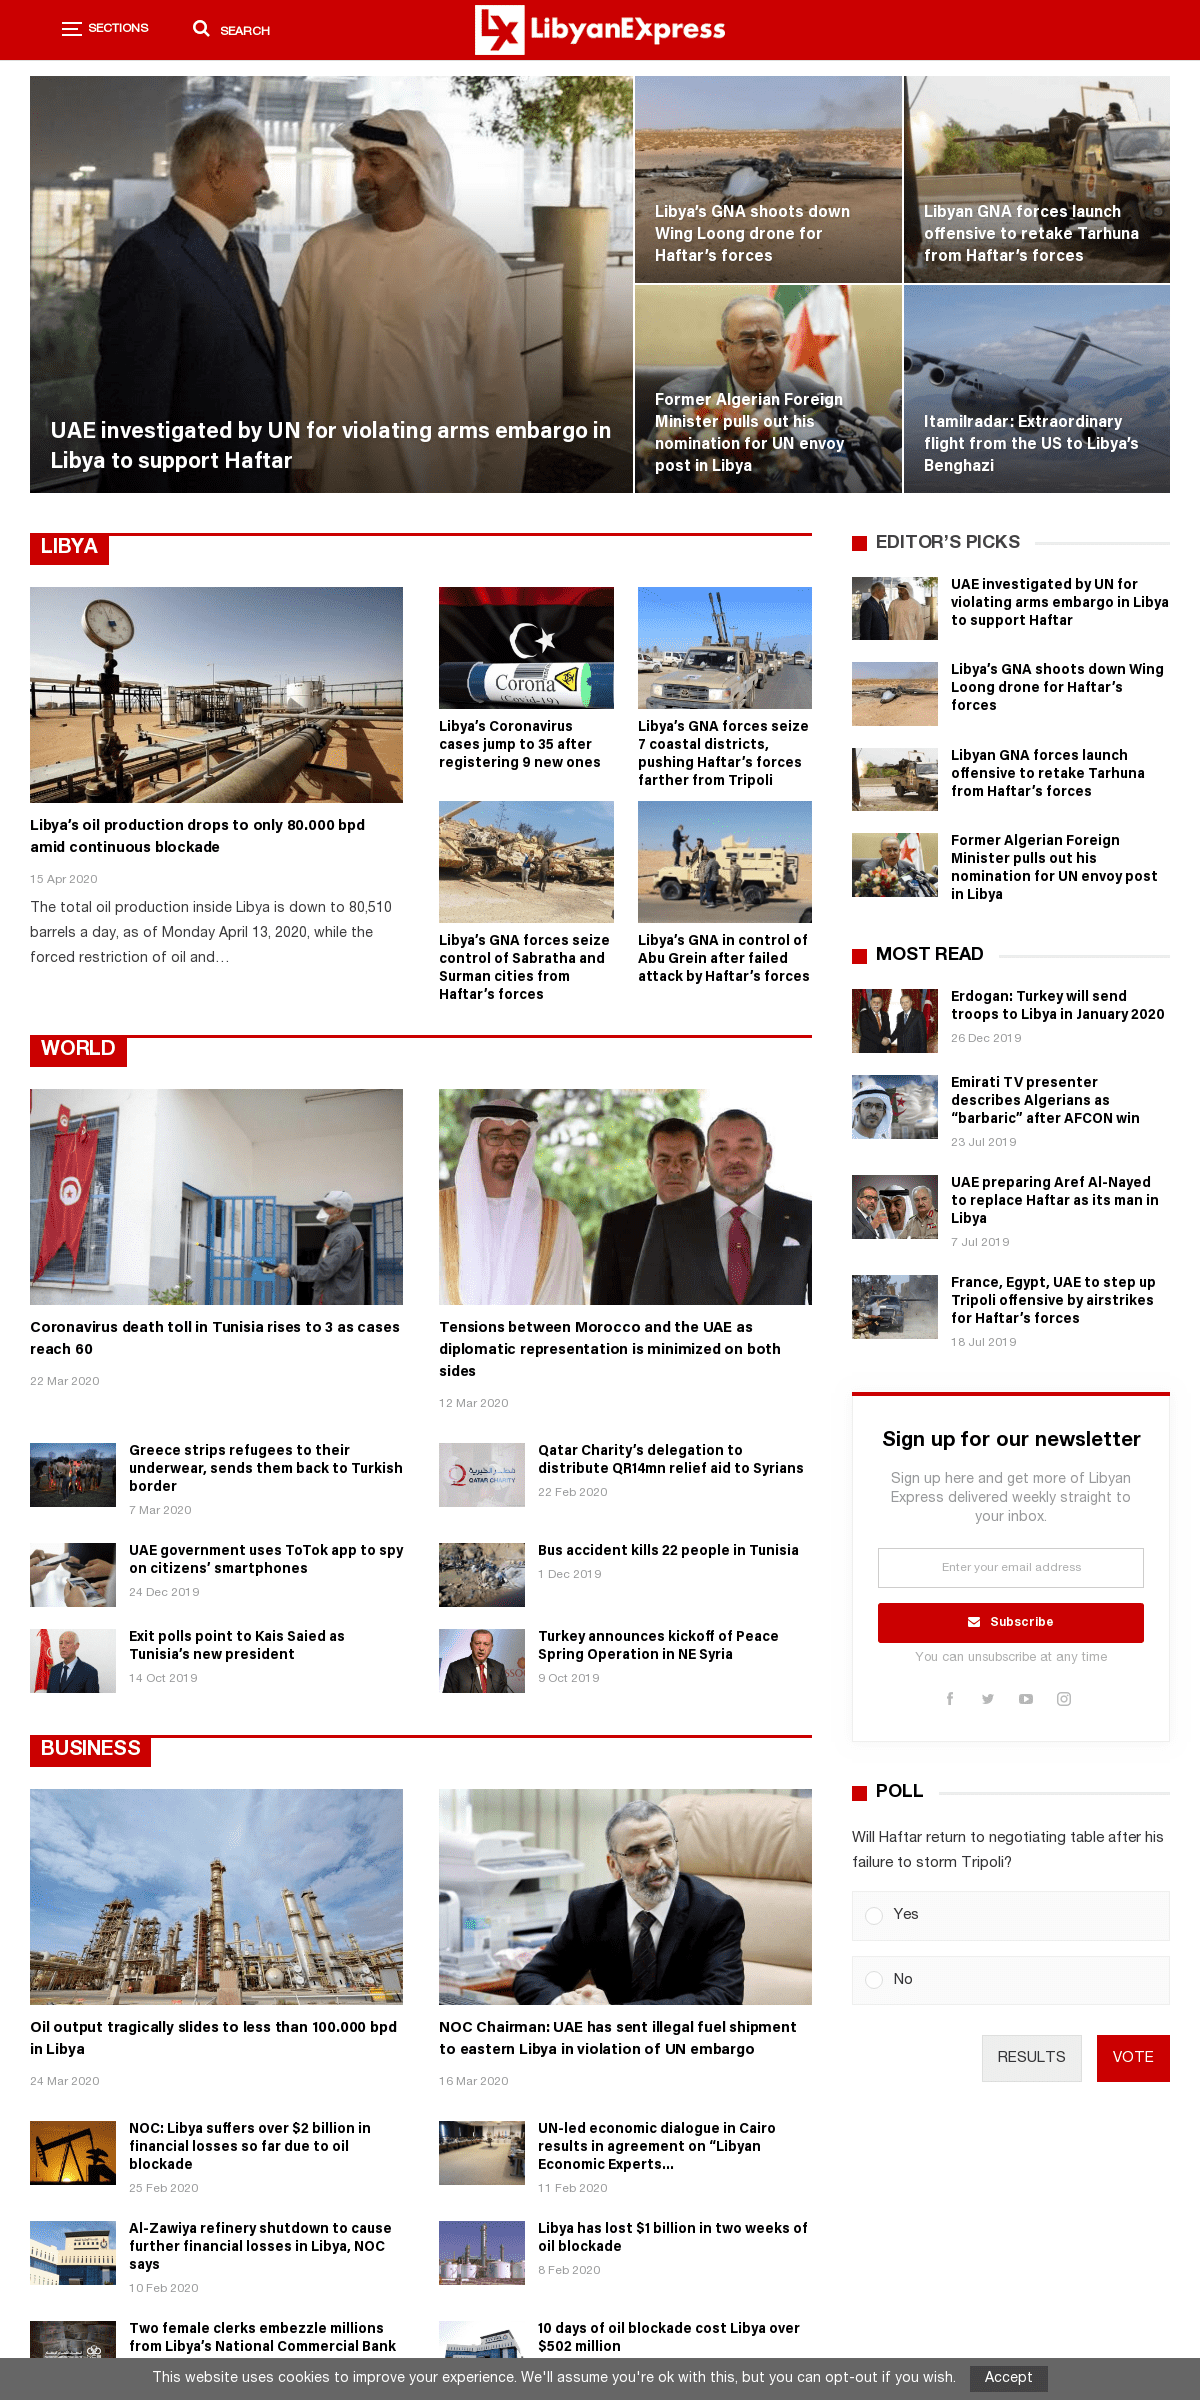 A complete backup of libyanexpress.com